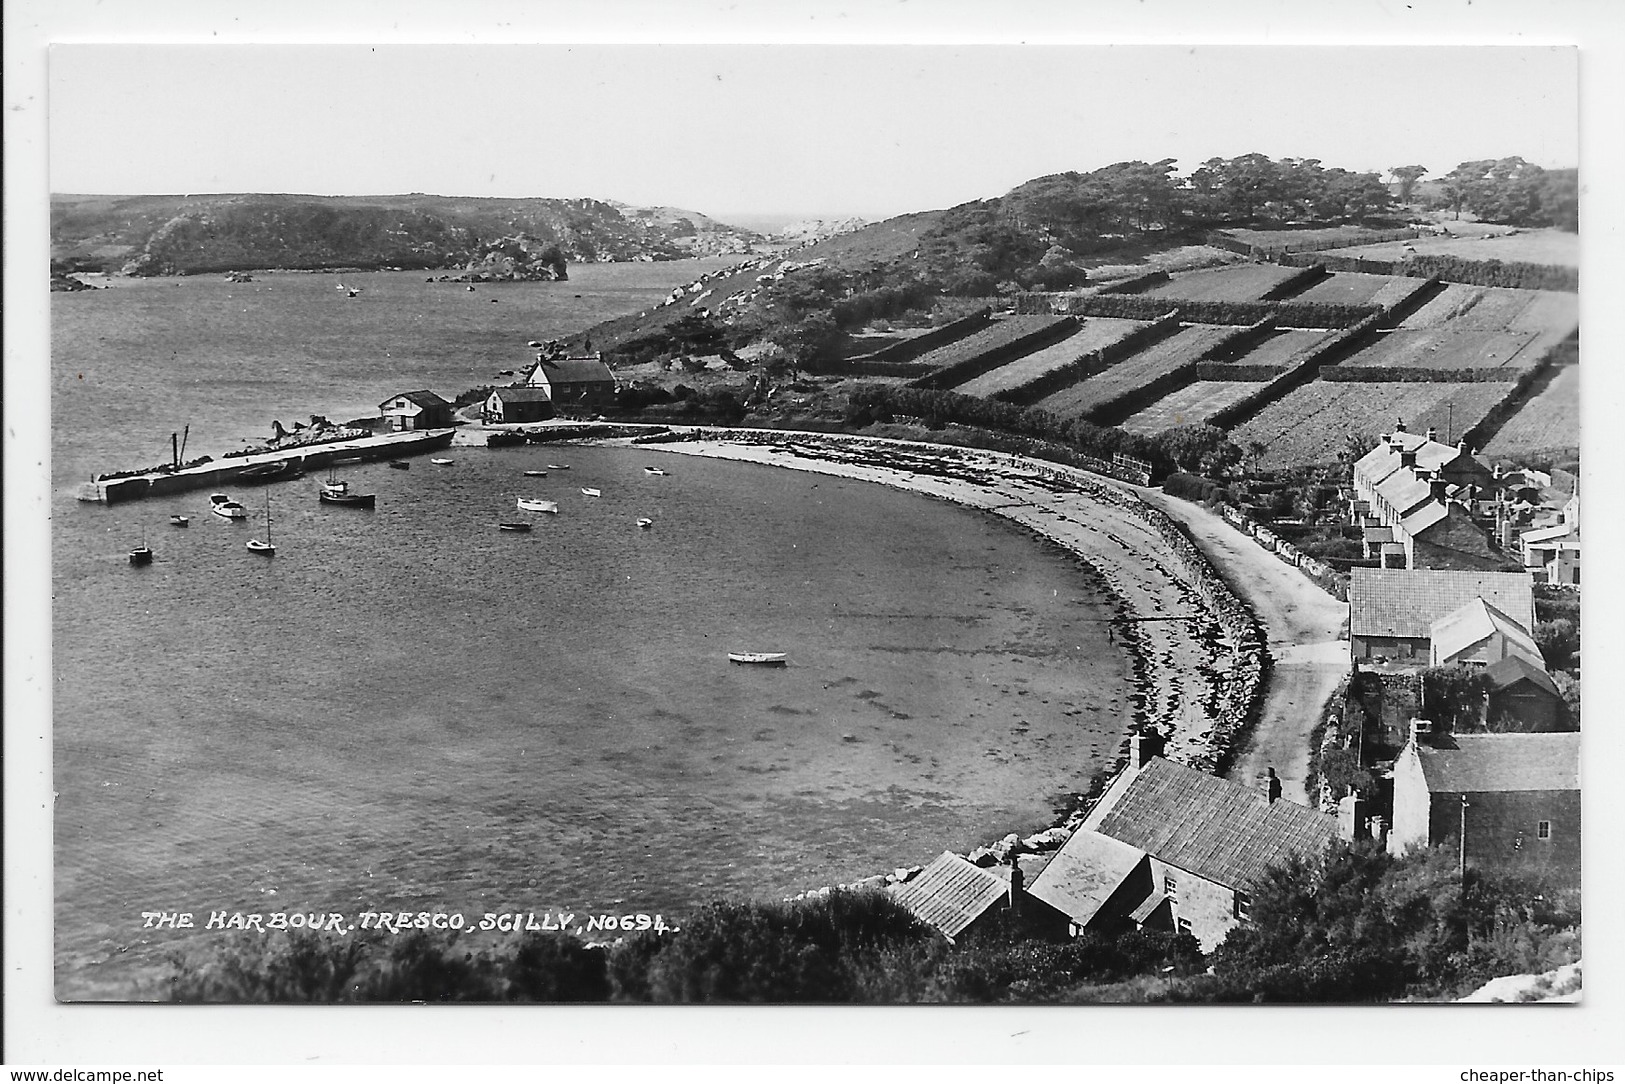 SCILLY ISLES - The Harbour, Tresco - James Gibson 694 - Scilly Isles